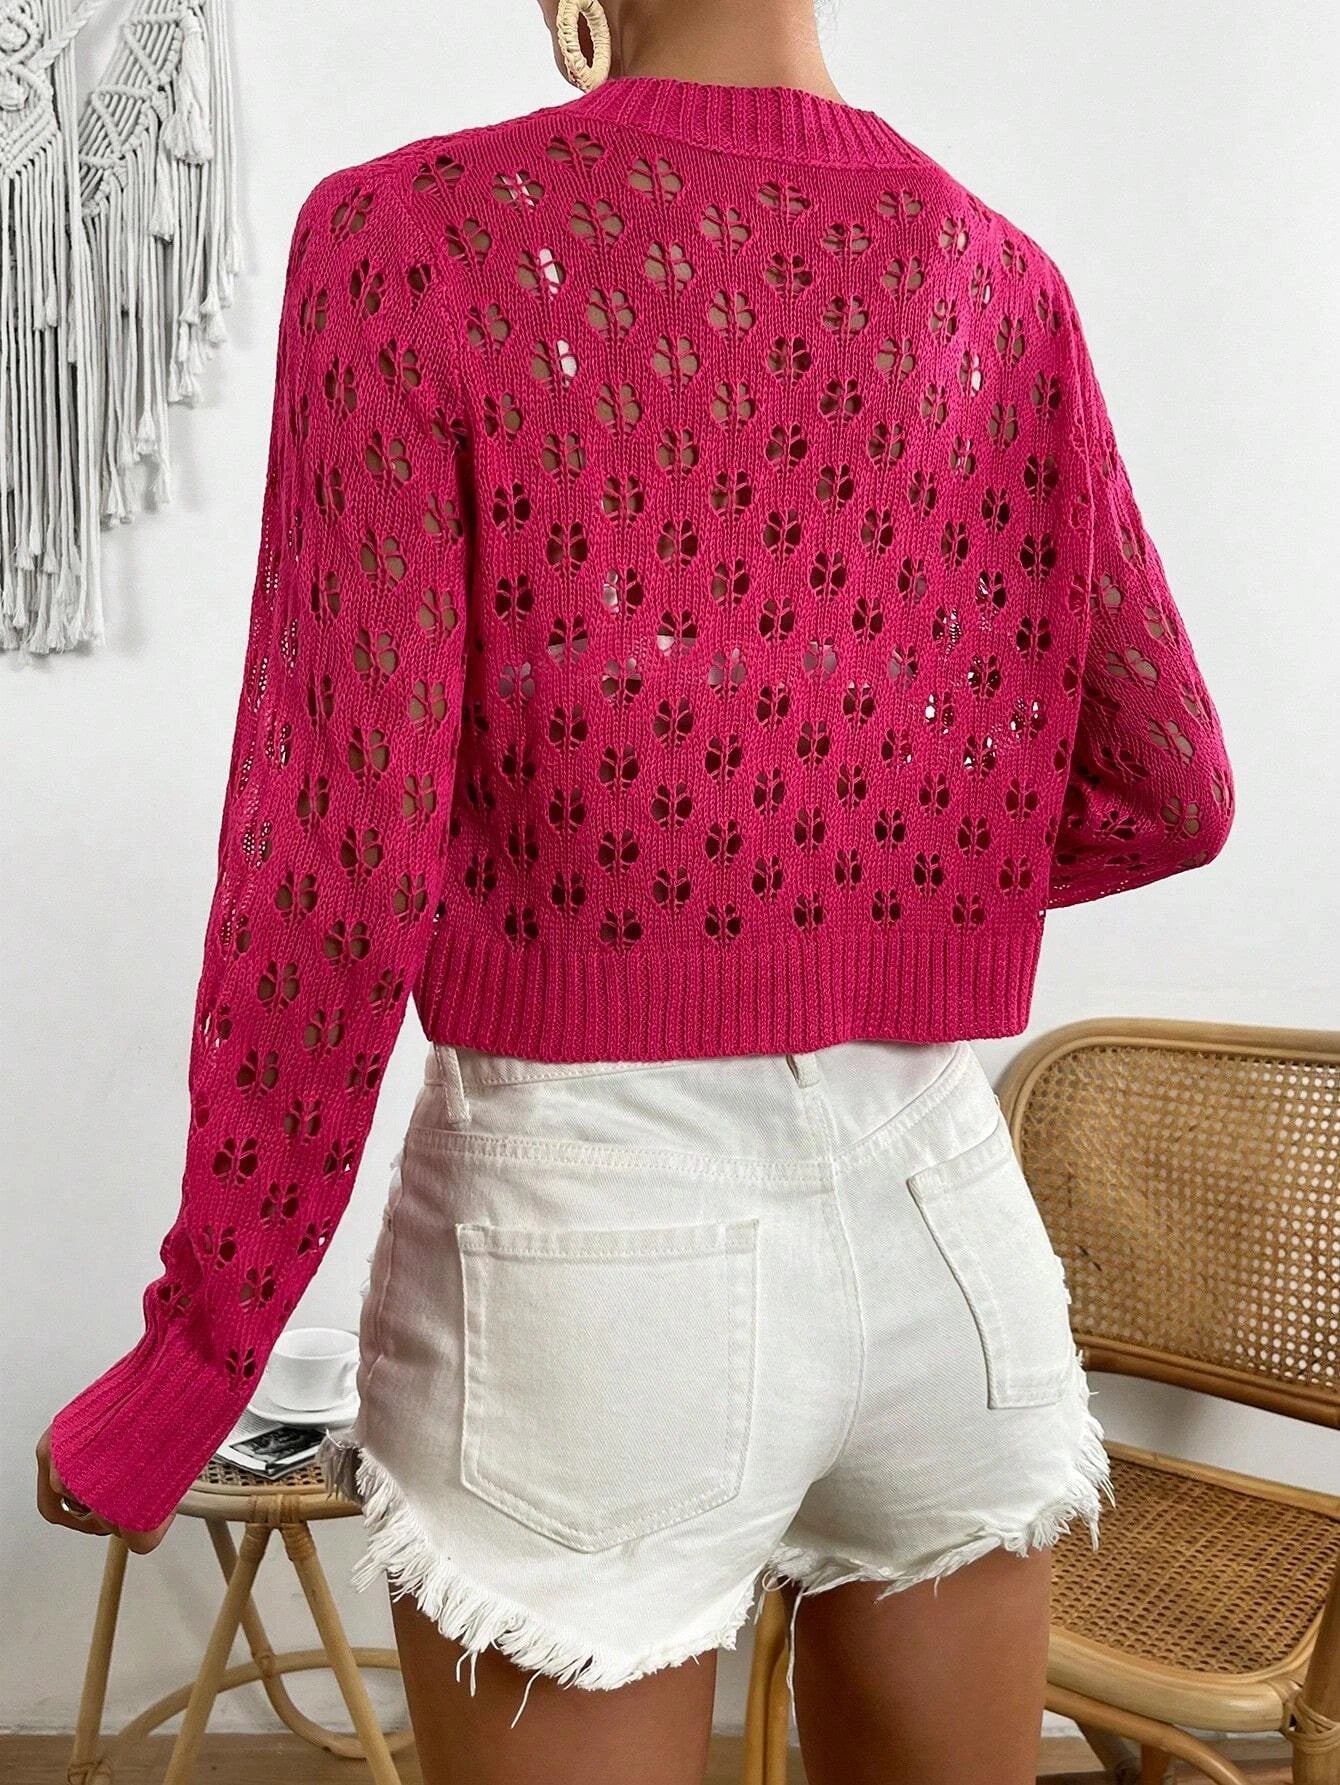 CM-CS998526 Women Casual Seoul Style Hollow Out Button Front Cardigan - Hot Pink